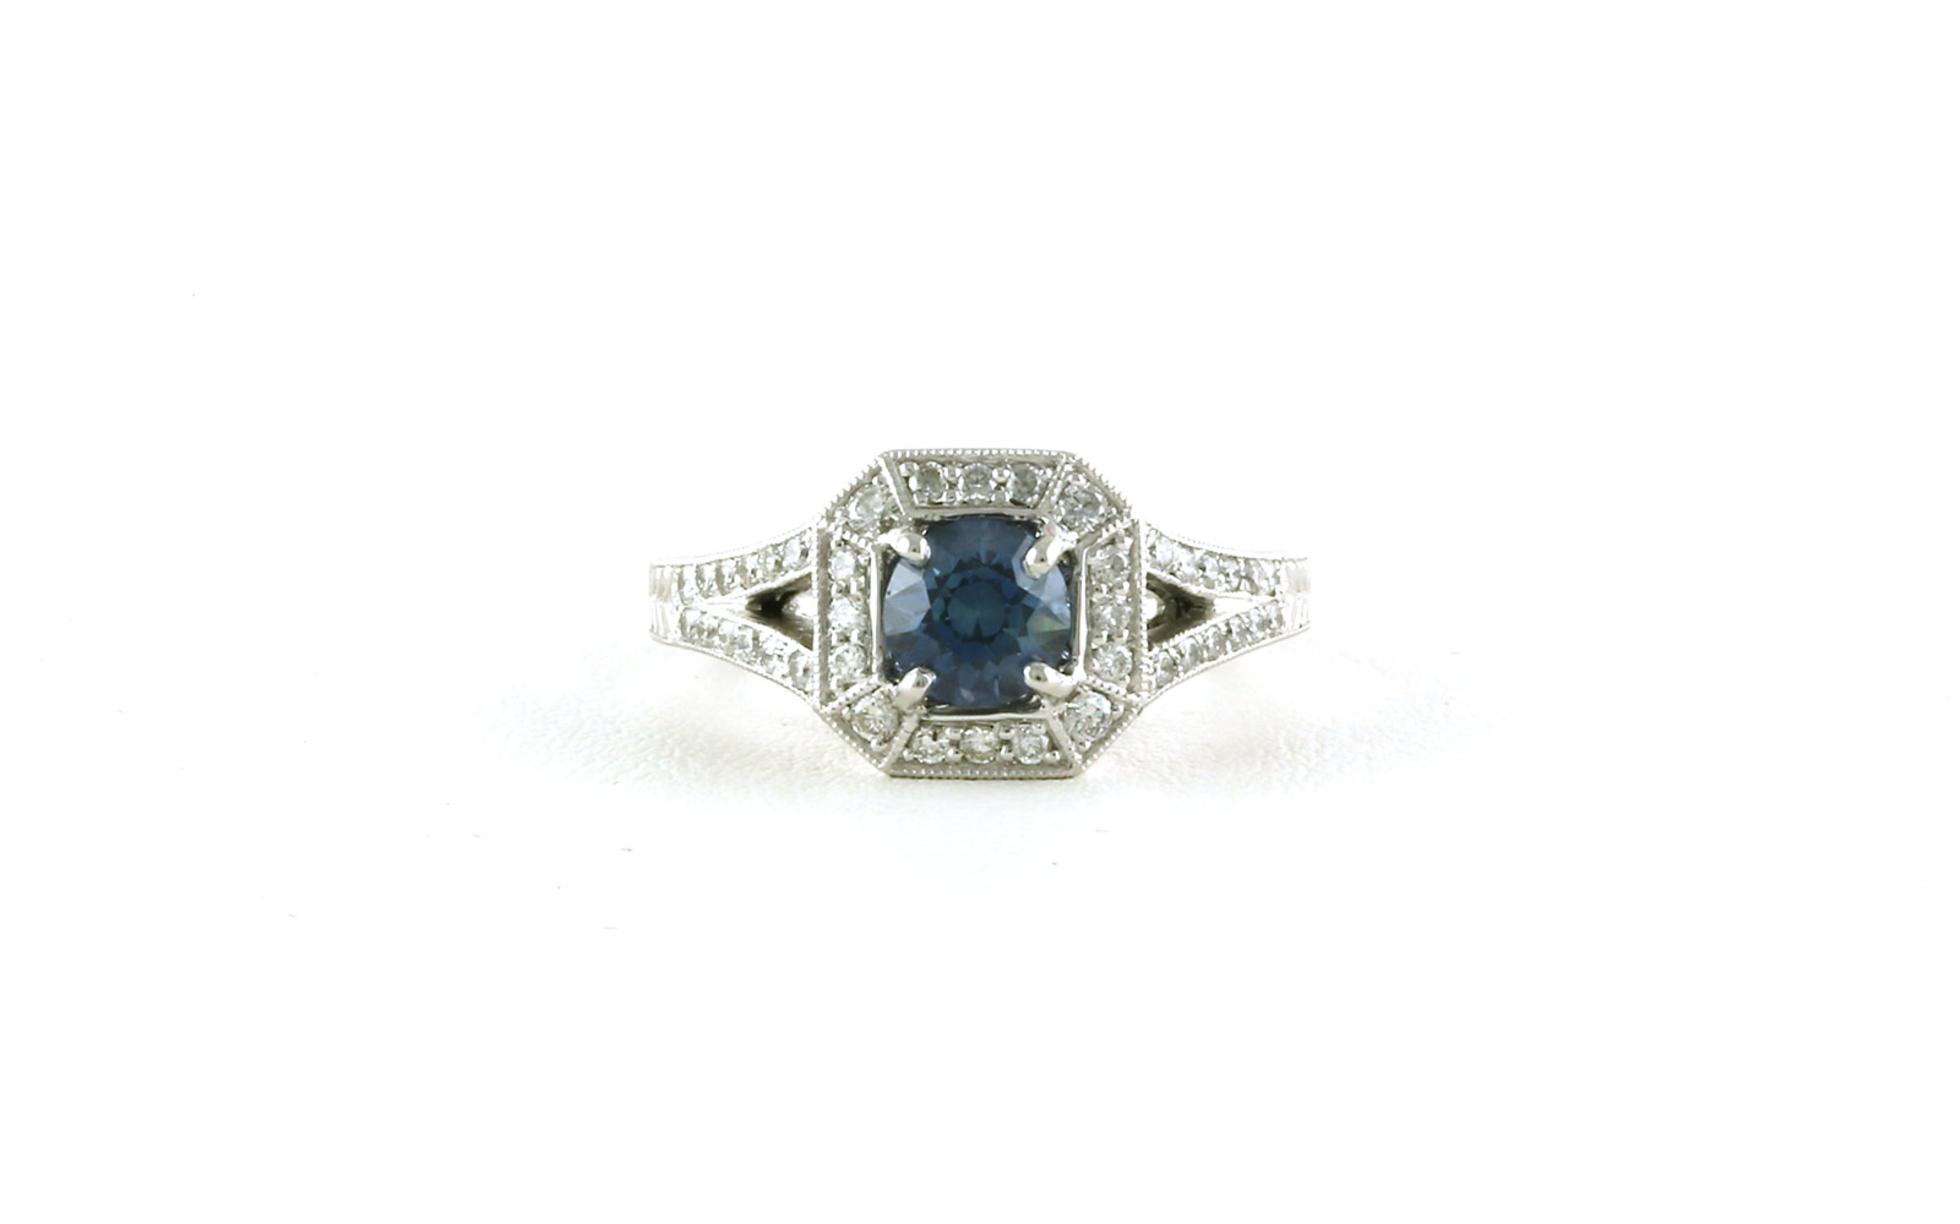 Estate Piece: Hexagonal Halo-style Montana Sapphire and Diamond Ring with Split-shank and Engraved Details in Platinum (1.36cts TWT)